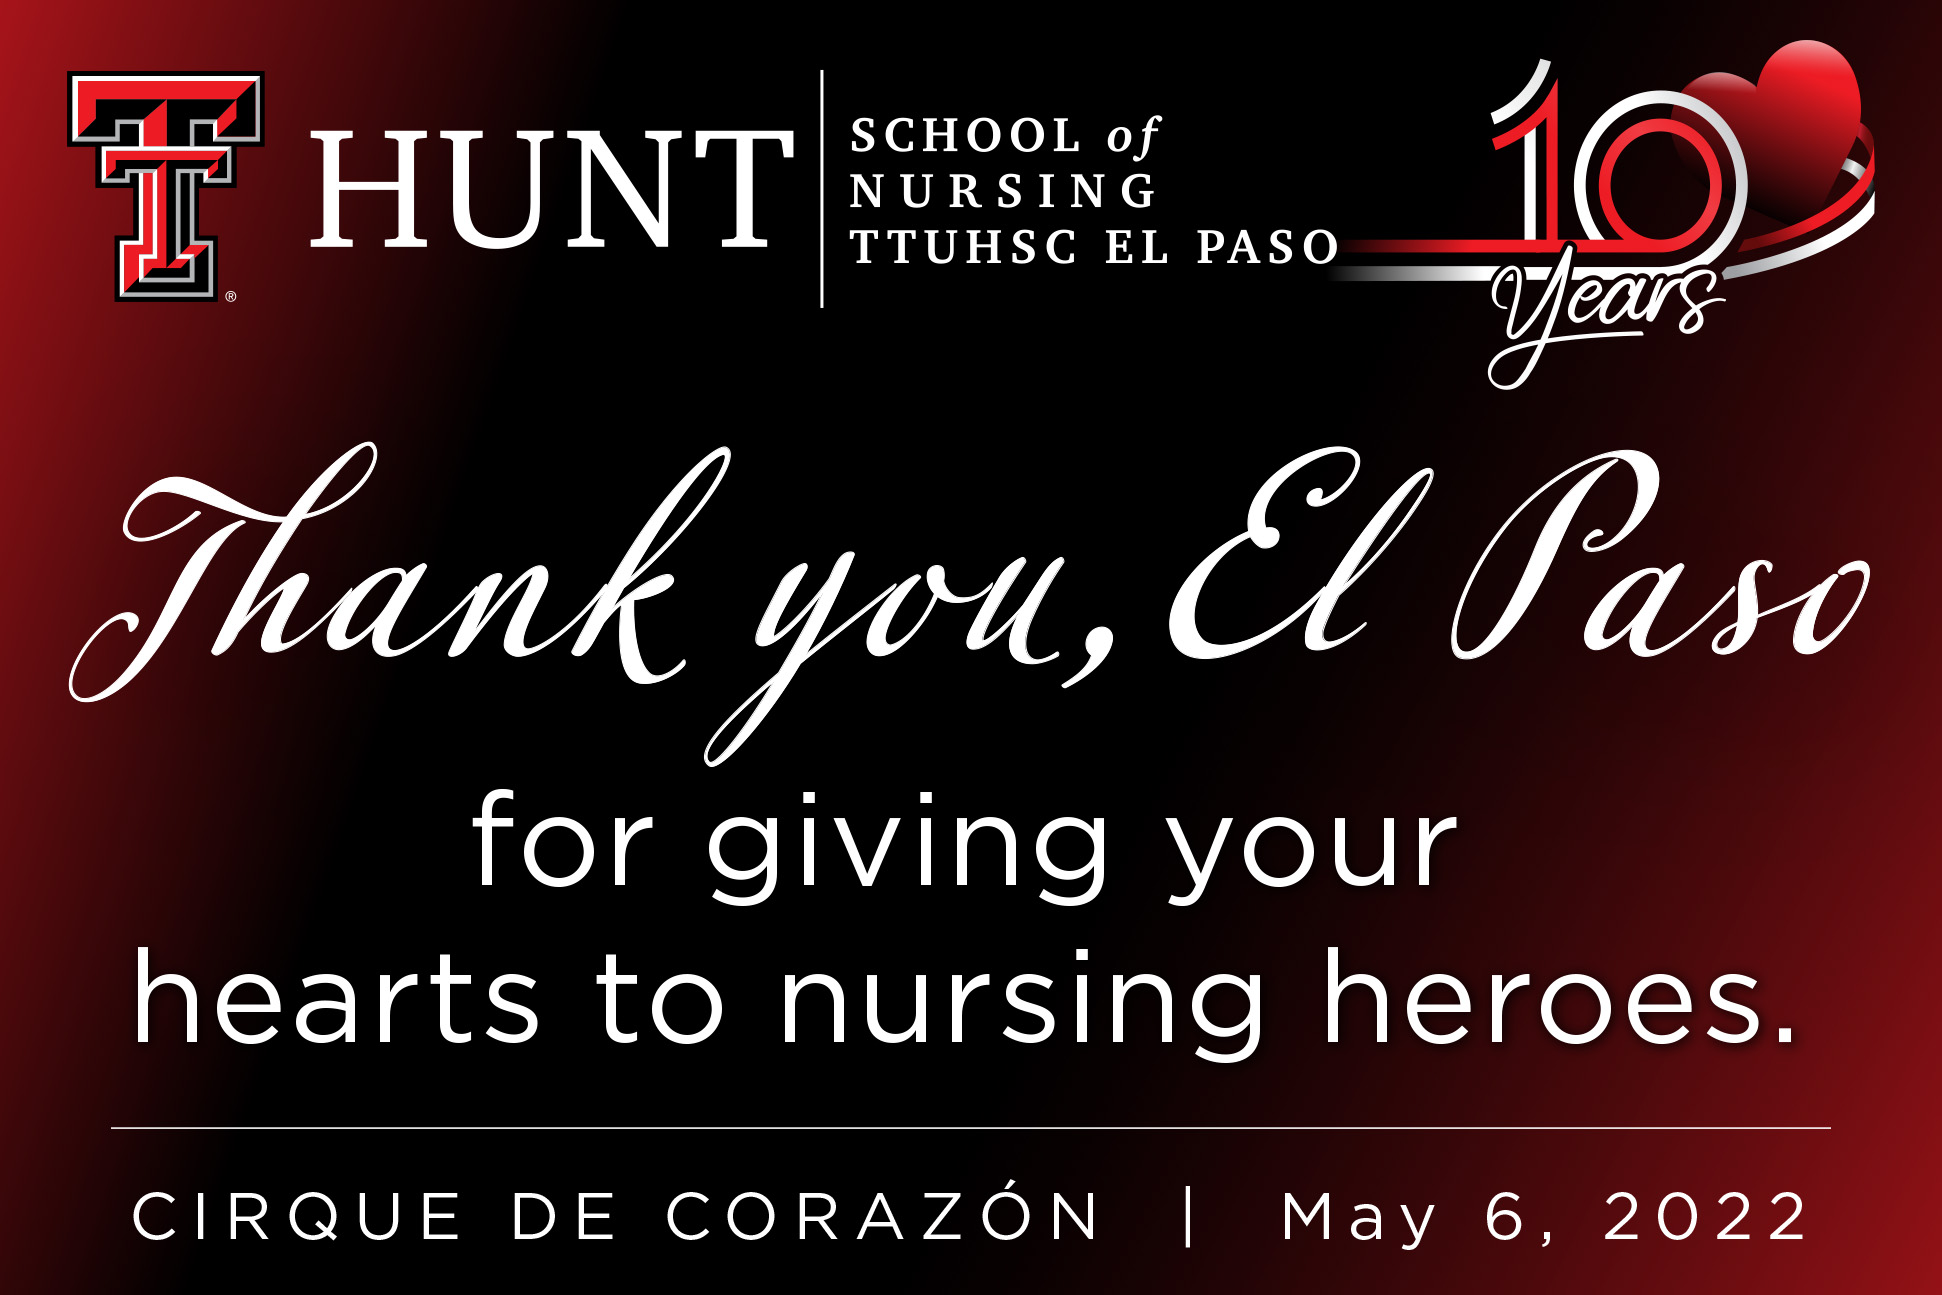 Thank you! For giving your heart to nursing heroes.